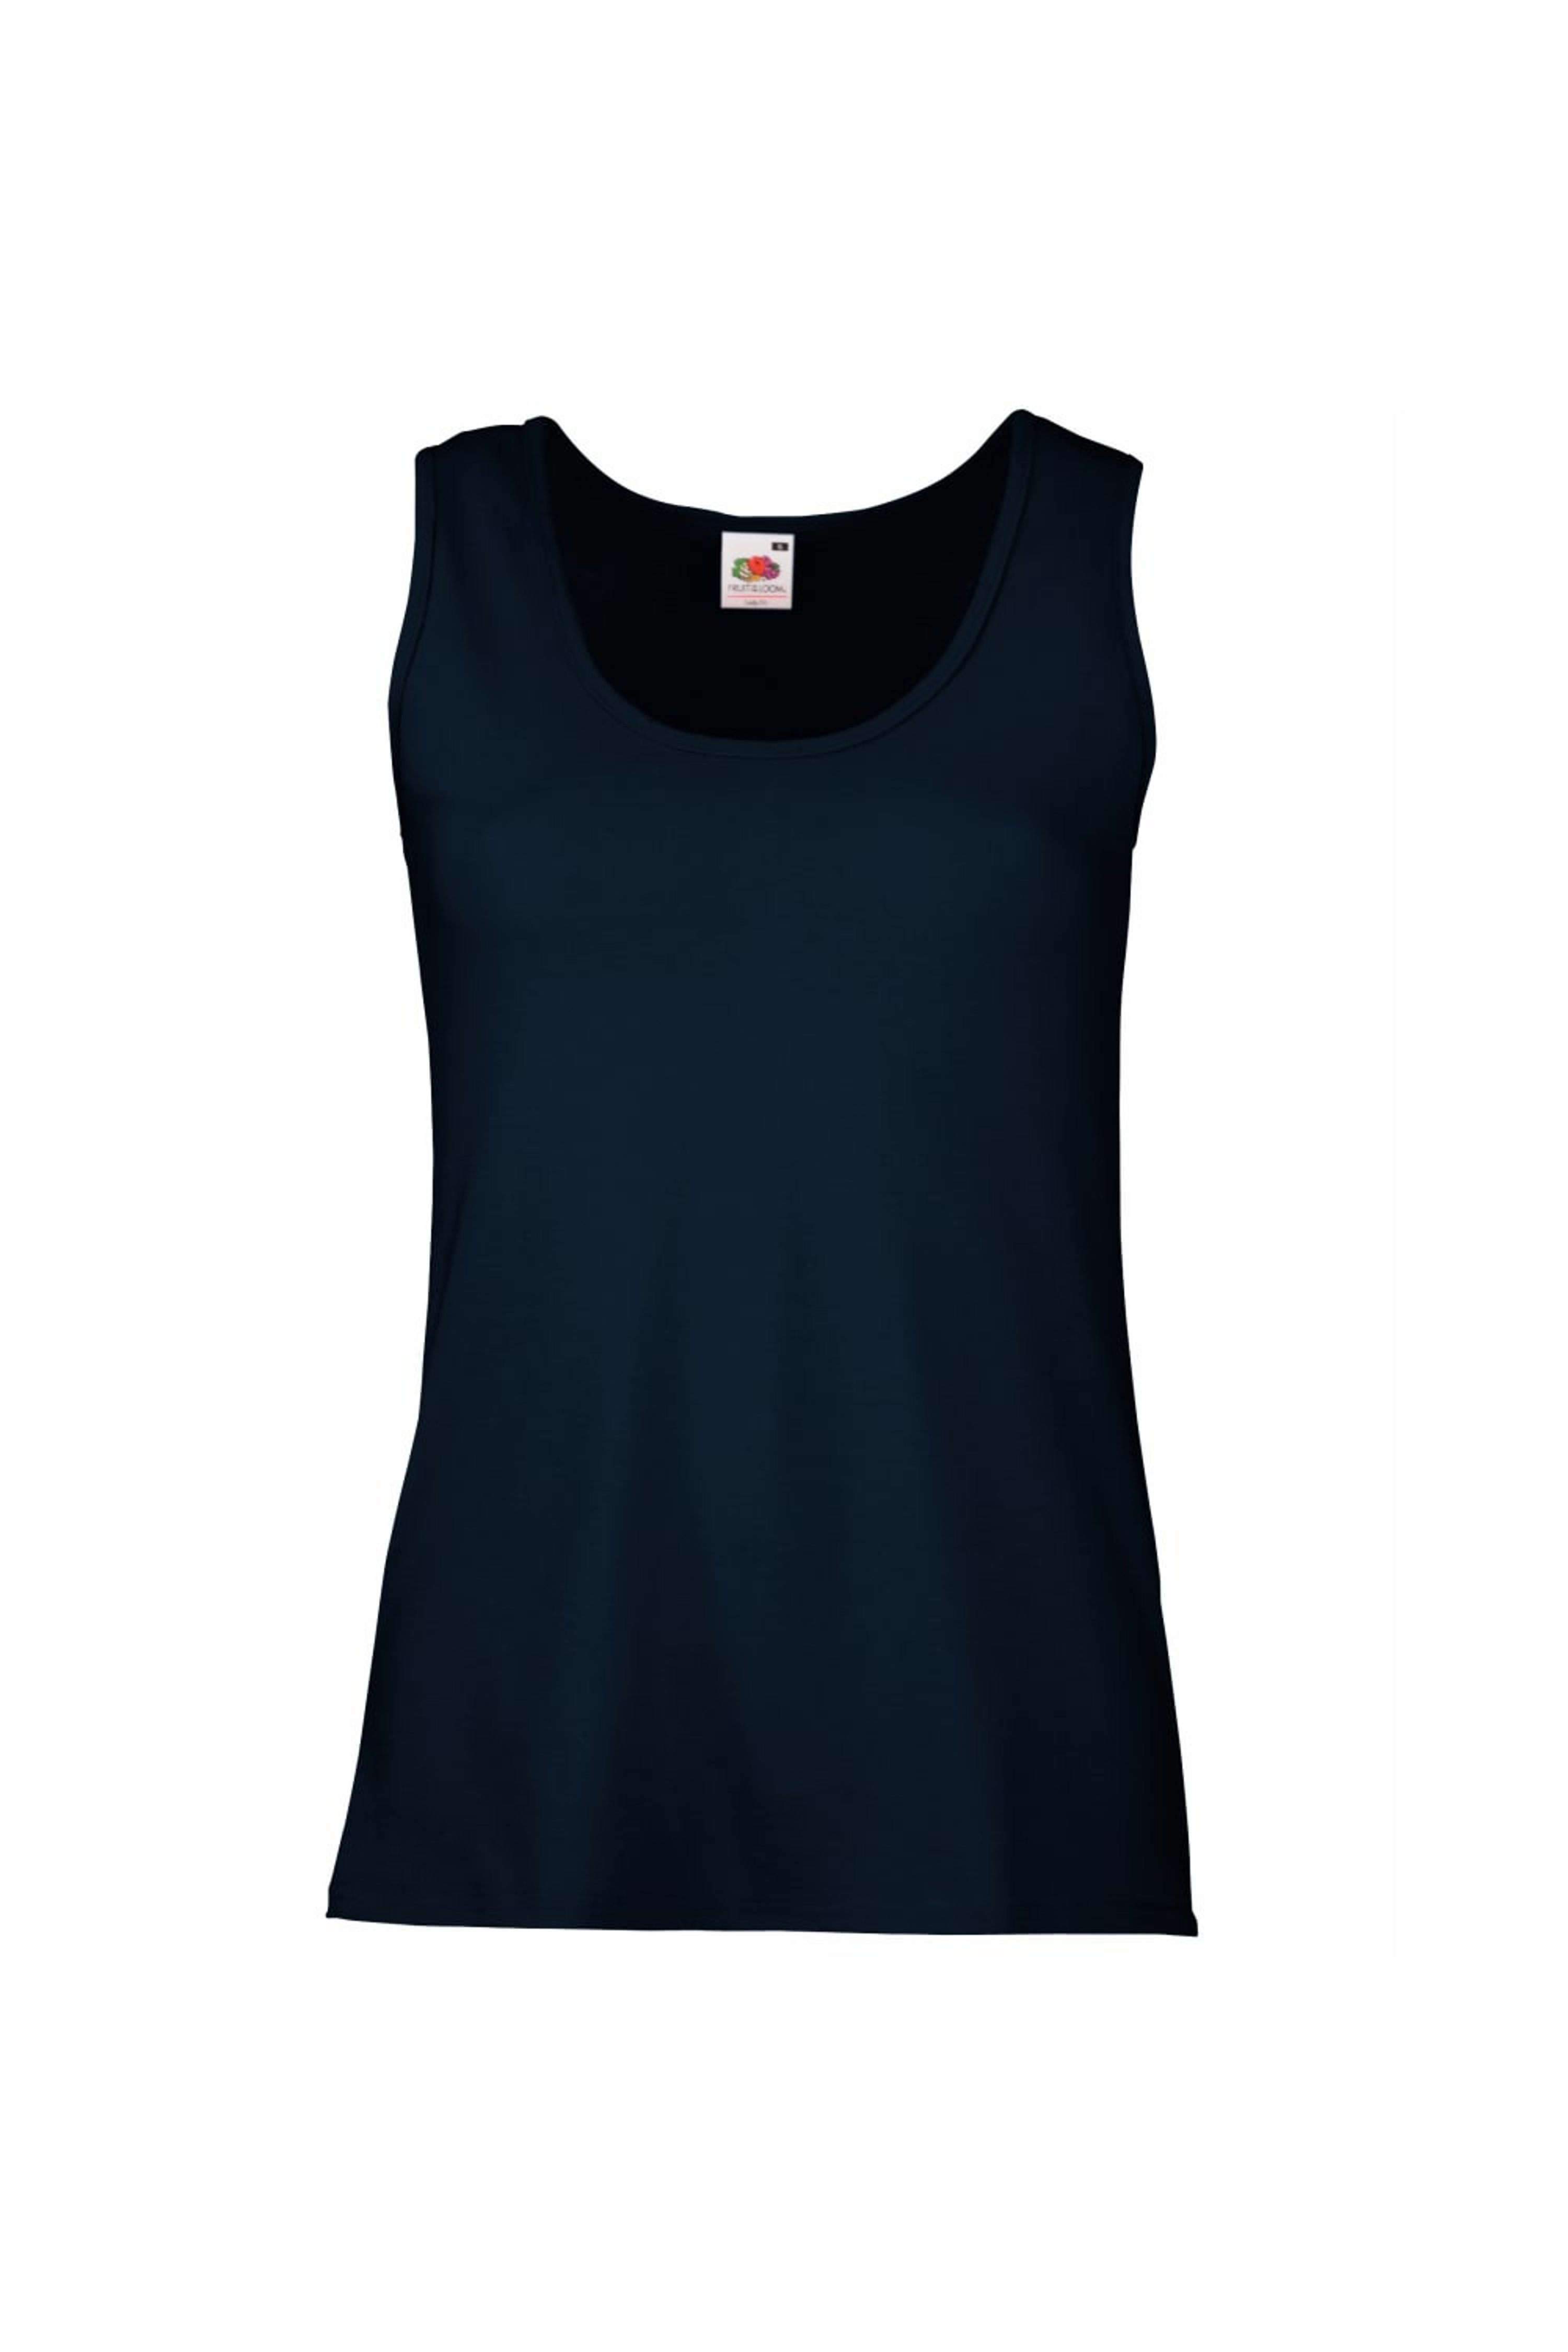 FRUIT OF THE LOOM FRUIT OF THE LOOM LADIES/WOMENS LADY-FIT VALUEWEIGHT VEST (DEEP NAVY)